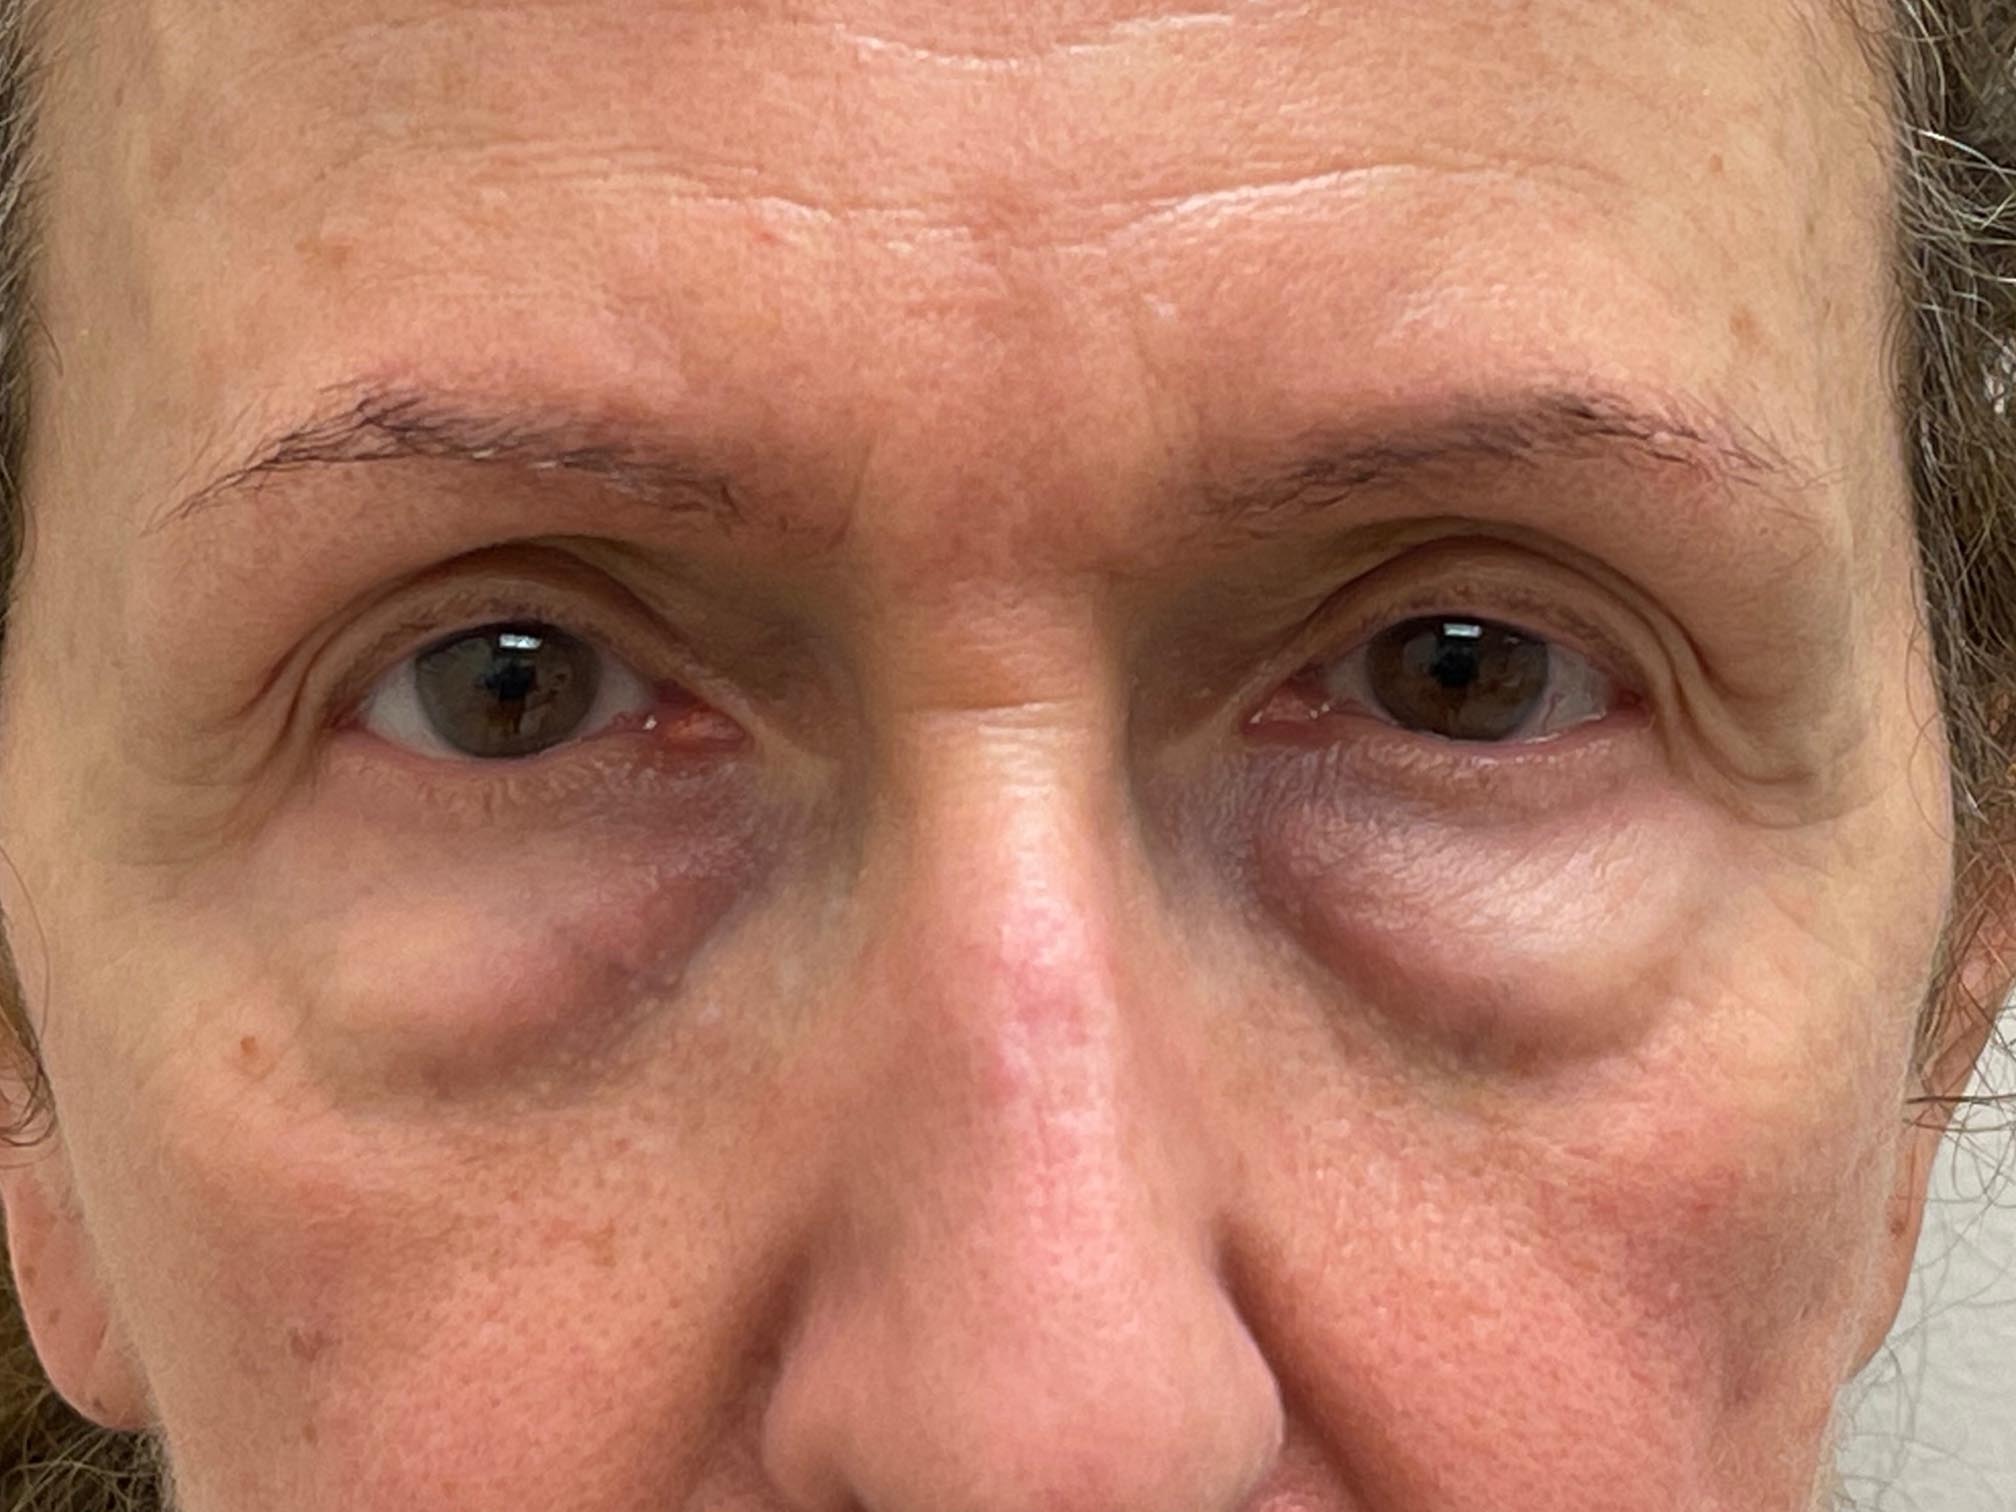 Photo of the patient’s face before the Blepharoplasty surgery. Patient 4 - Set 5